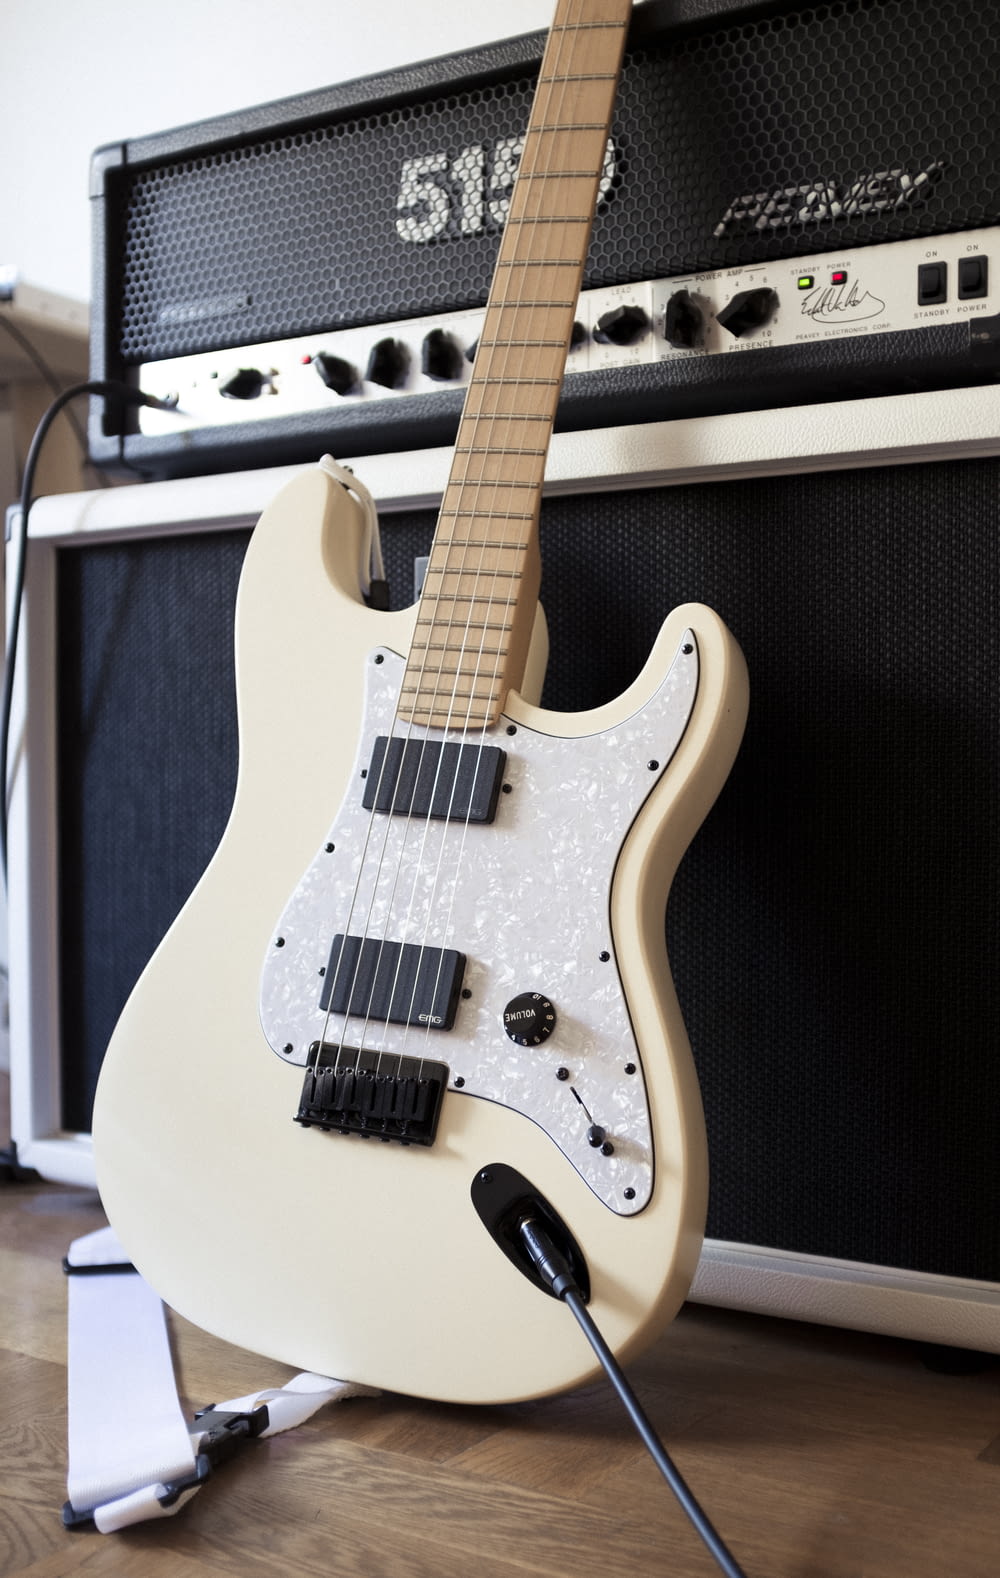 white and black electric guitar beside black guitar amplifier